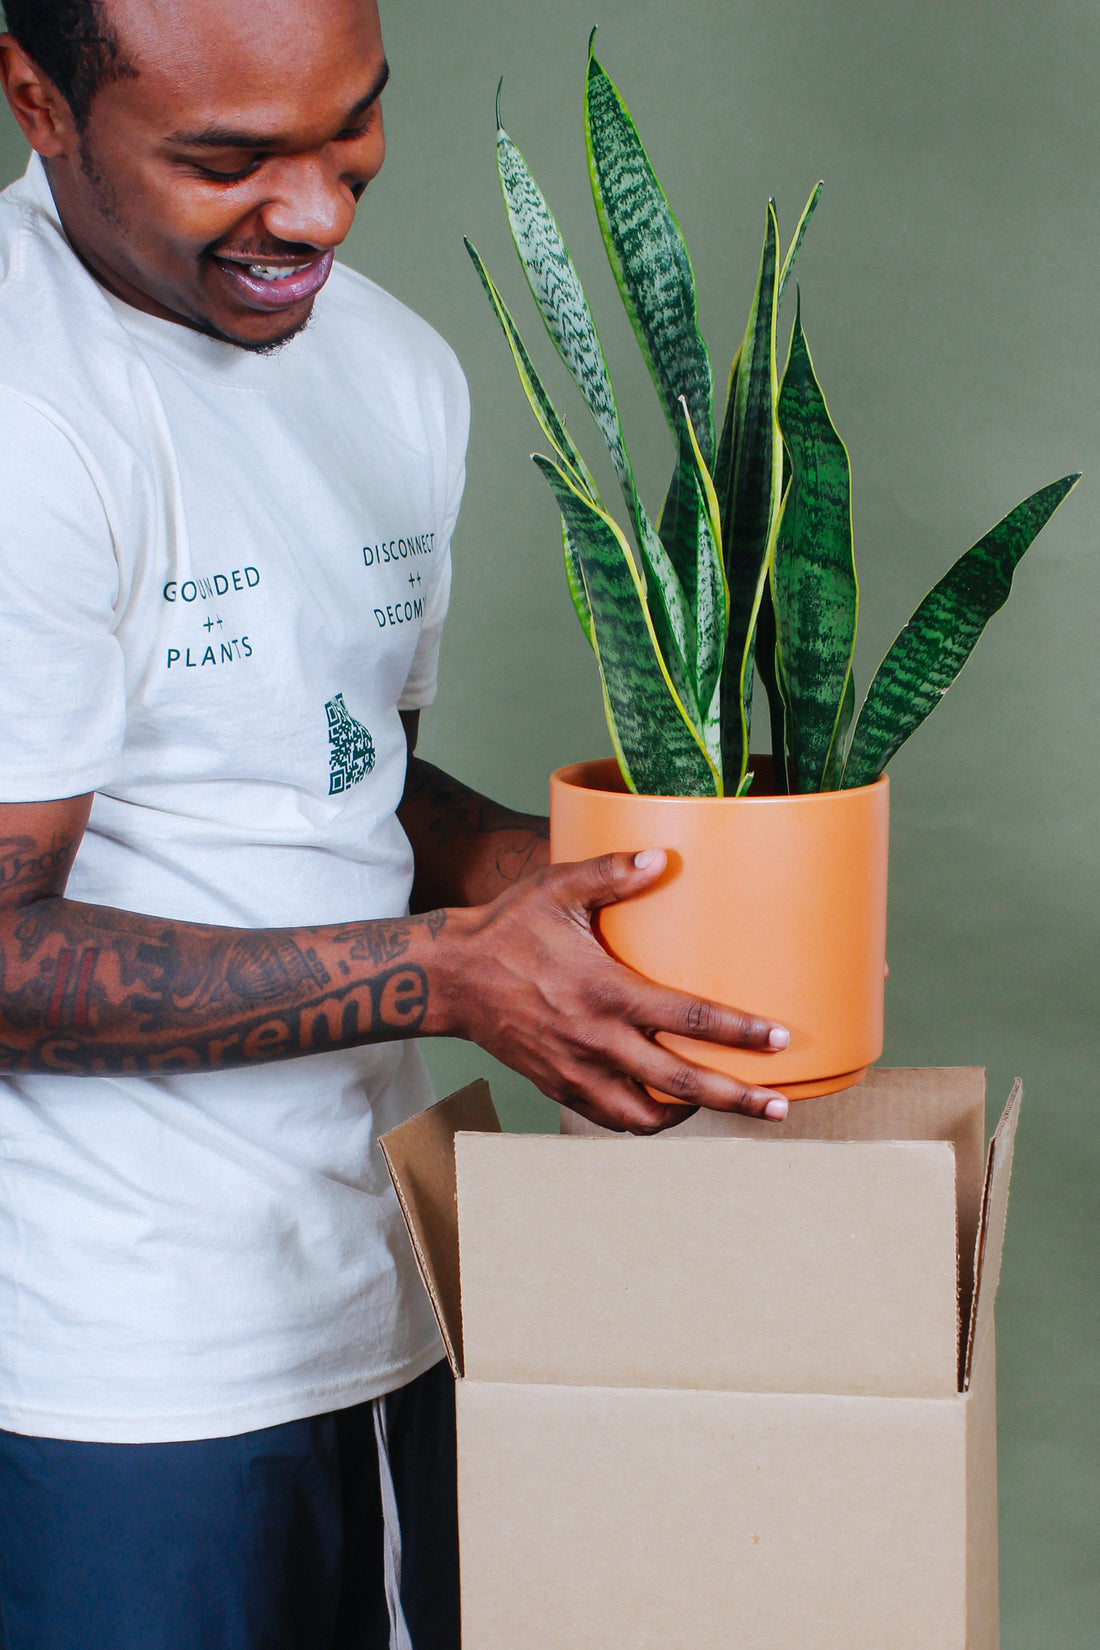 A person smiles as they open their new plant package in the mail.